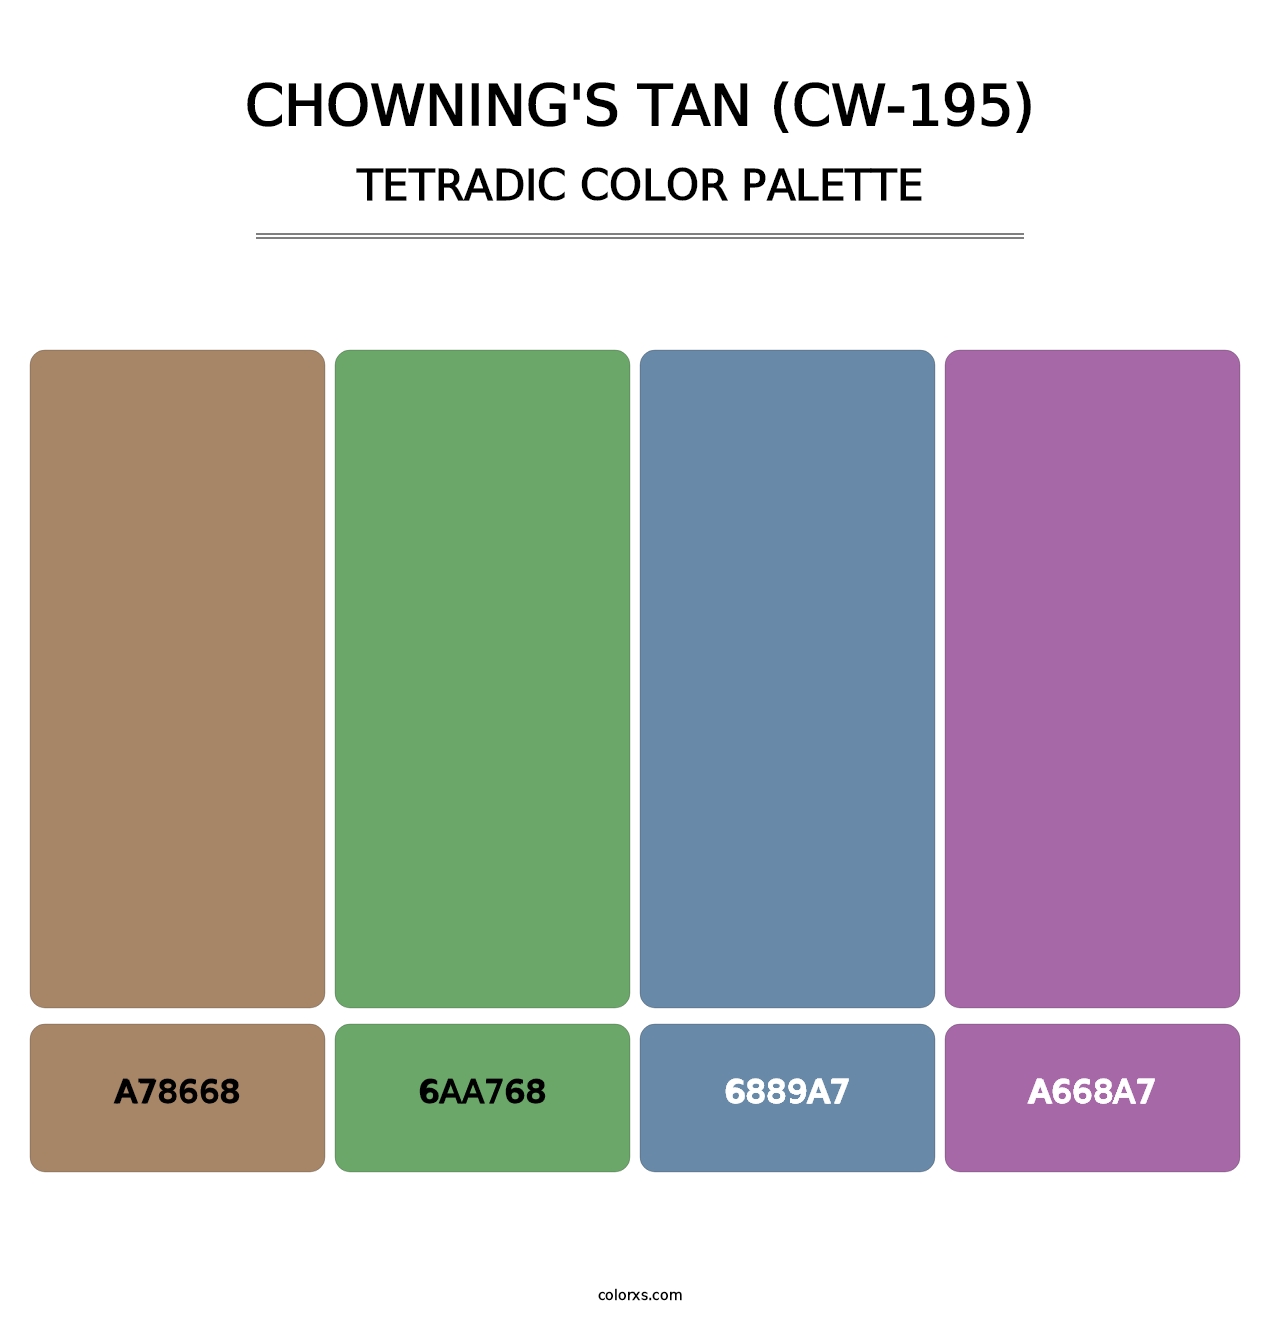 Chowning's Tan (CW-195) - Tetradic Color Palette